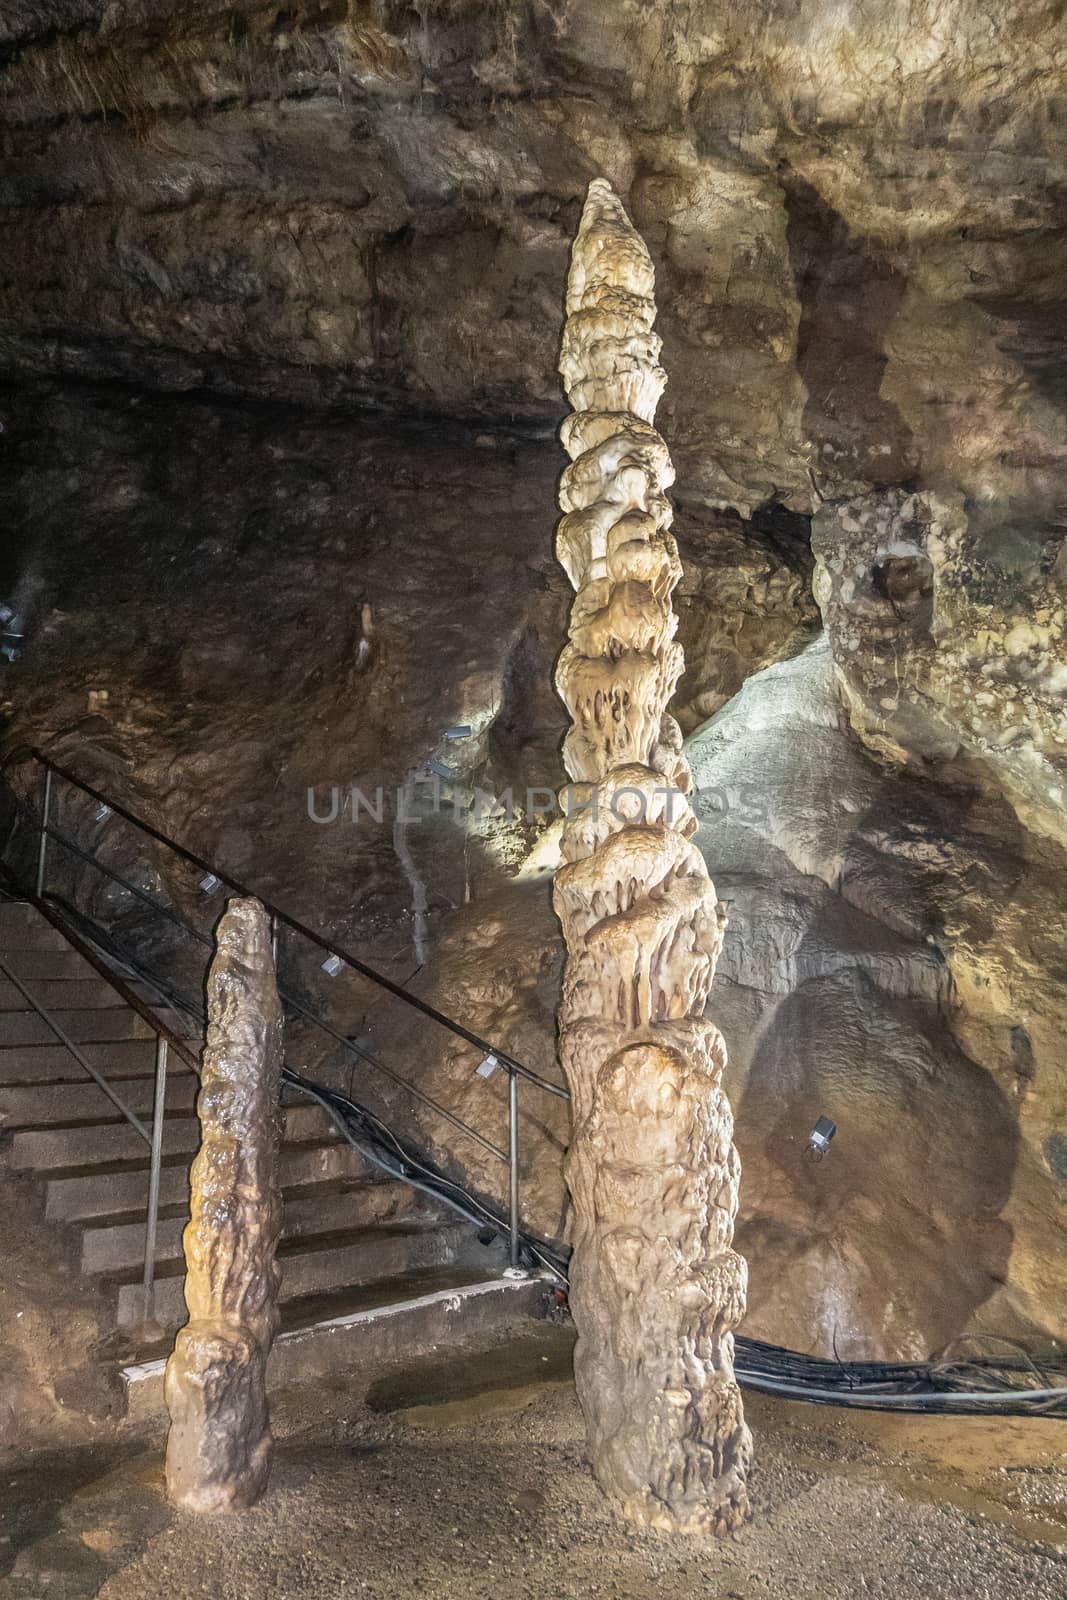 Han-sur-Lesse, Belgium - June 25, 2019: Grottes-de-Han 13 of 36. subterranean pictures of Stalagmites and stalactites in different shapes and colors throughout tunnels, caverns and large halls.